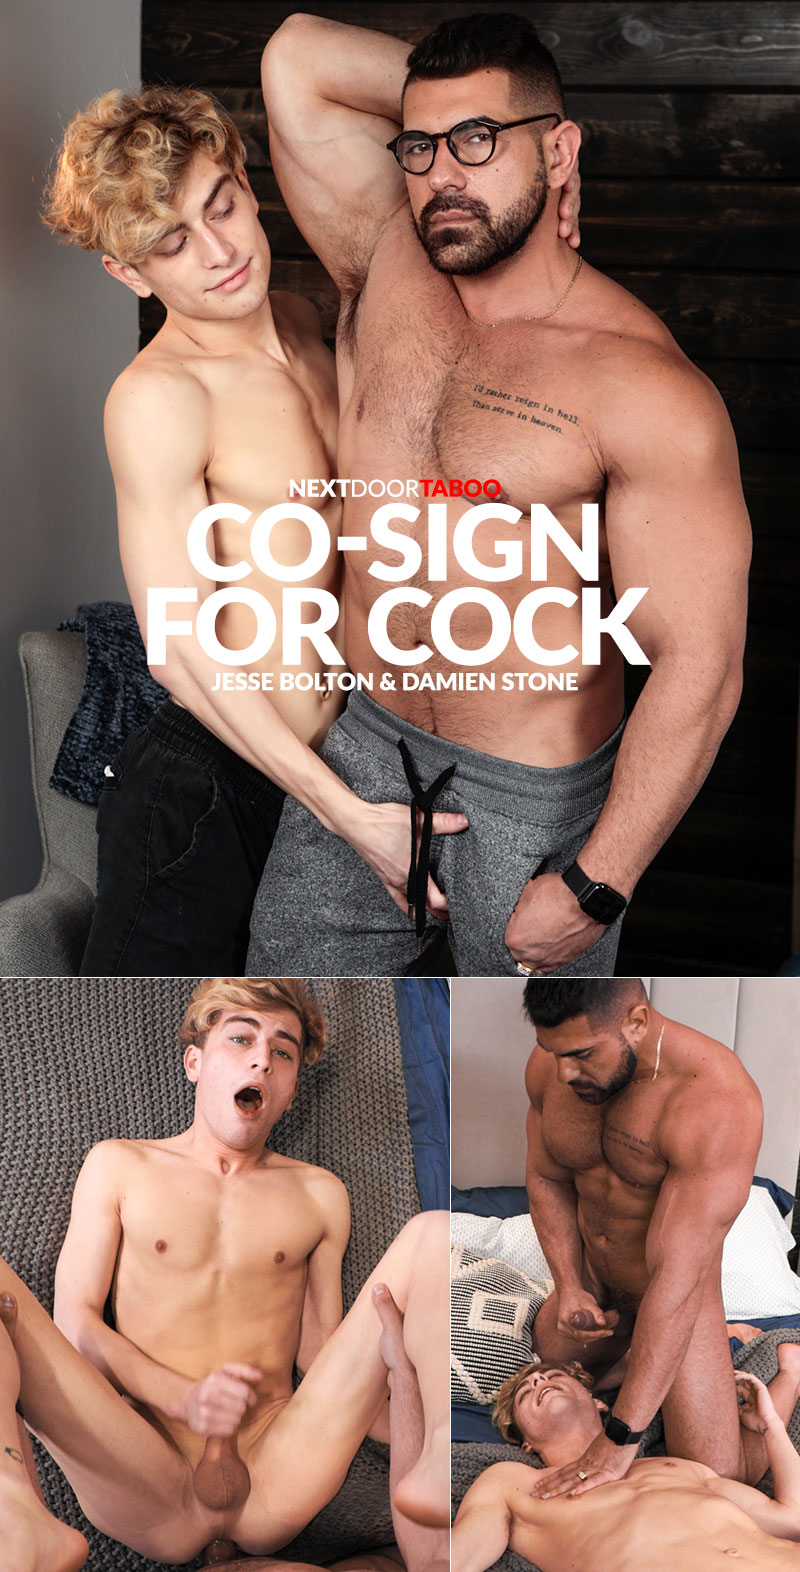 Jesse Bolton Damien Stone Co Sign For Cock Next Door Taboo